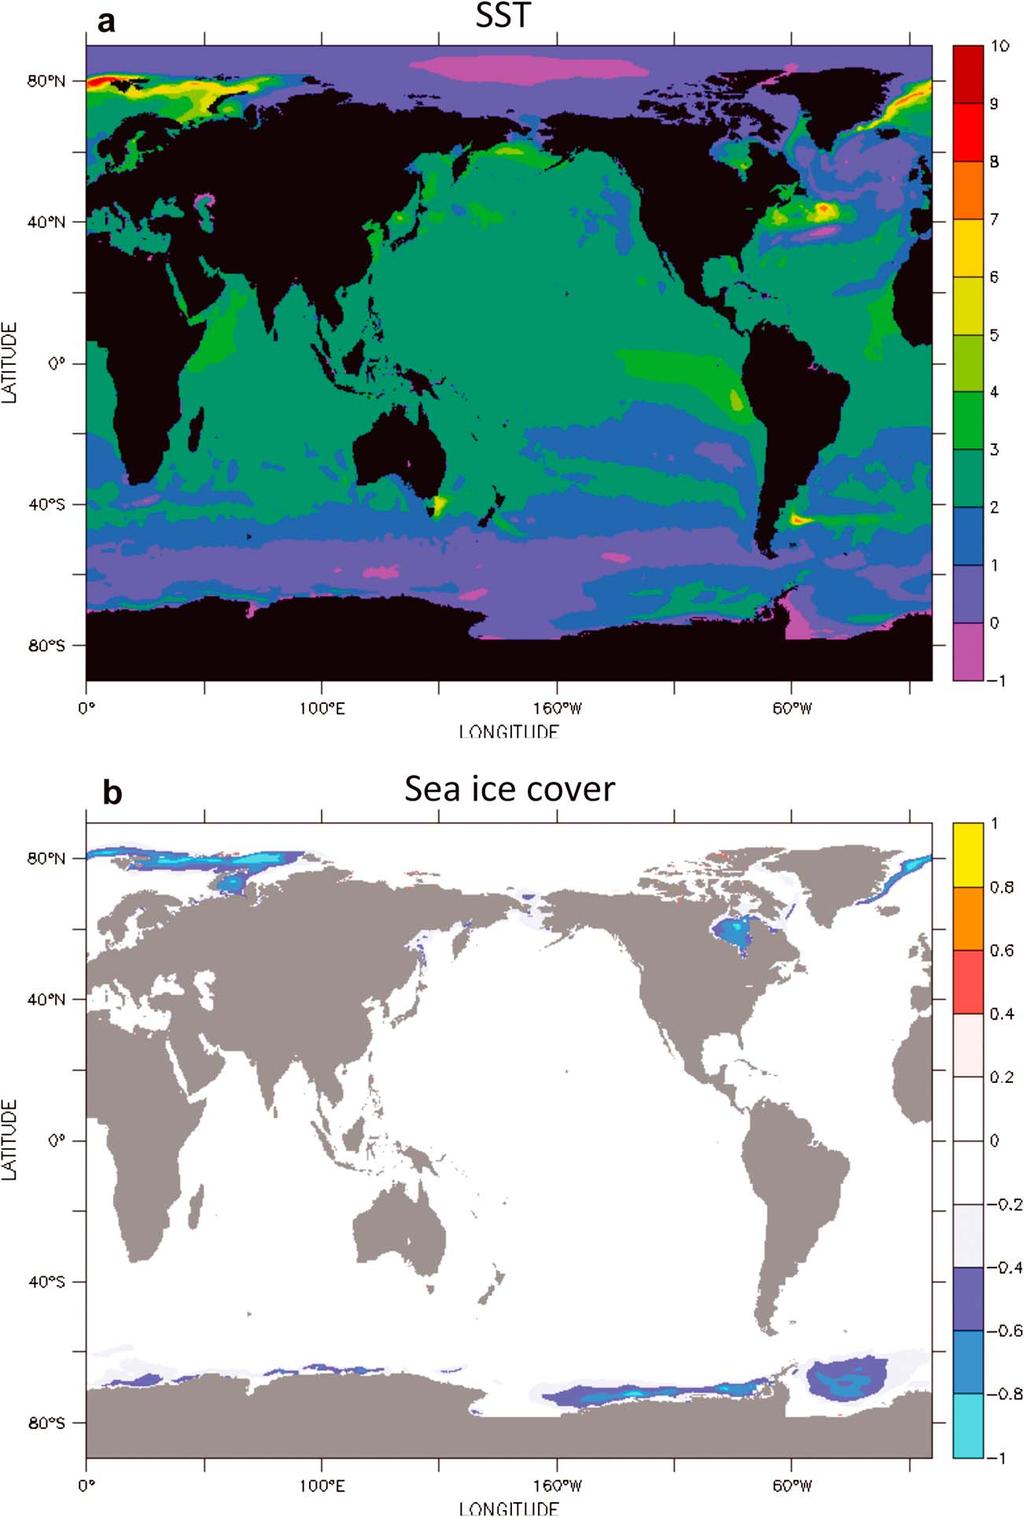 Figure 2. Difference in (a) sea surface temperature (SST) (K) and (b) sea ice cover, between the periods 2094 2098 and 2002 2006 [Sterl et al., 2008].